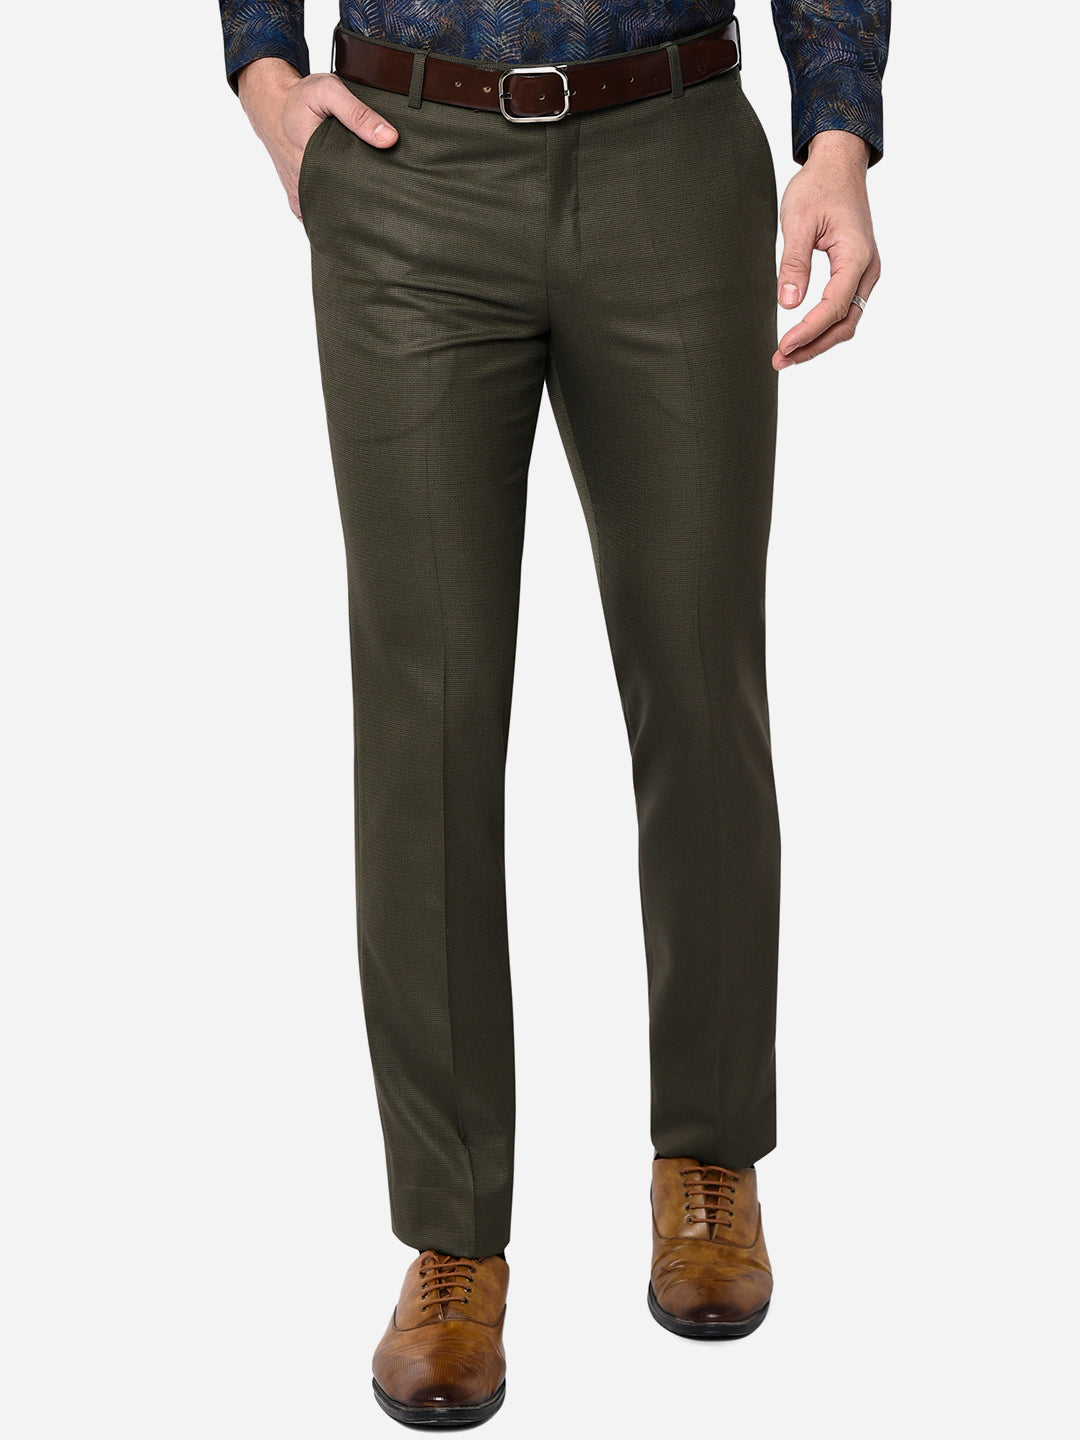 Buy Men Olive Slim Fit Solid Casual Trousers Online - 711397 | Allen Solly